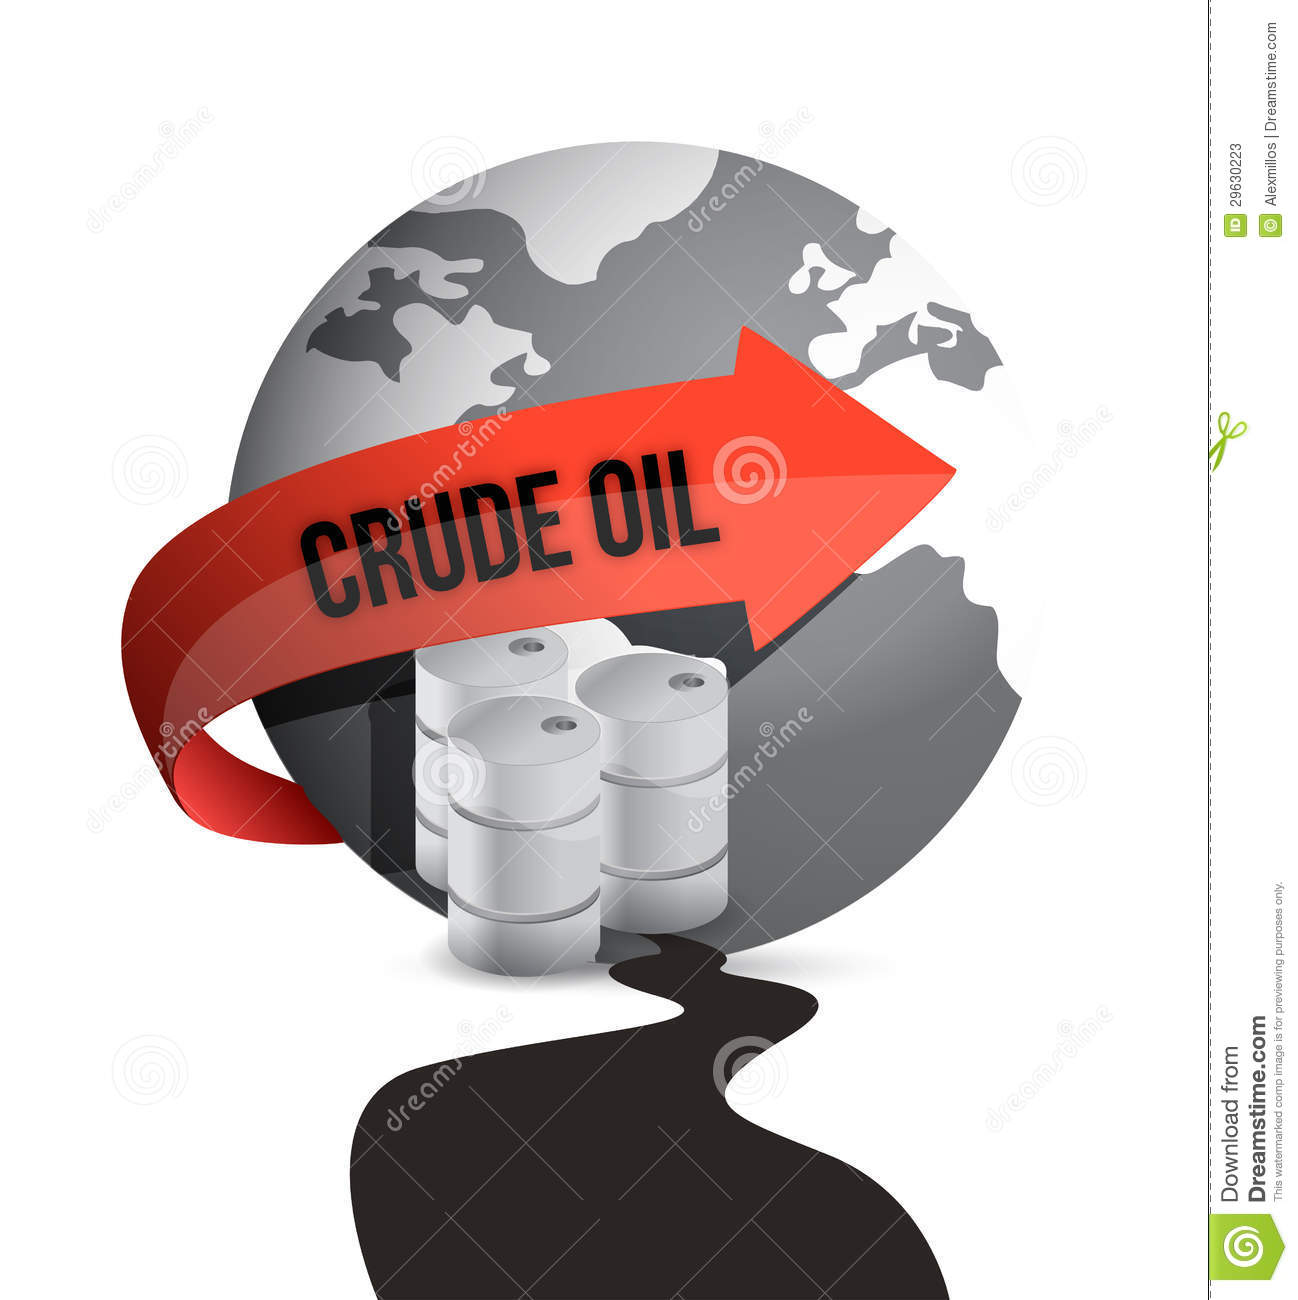 Oil Drum Barrel And Earth Globe In An Oil Spill Stock Photos   Image